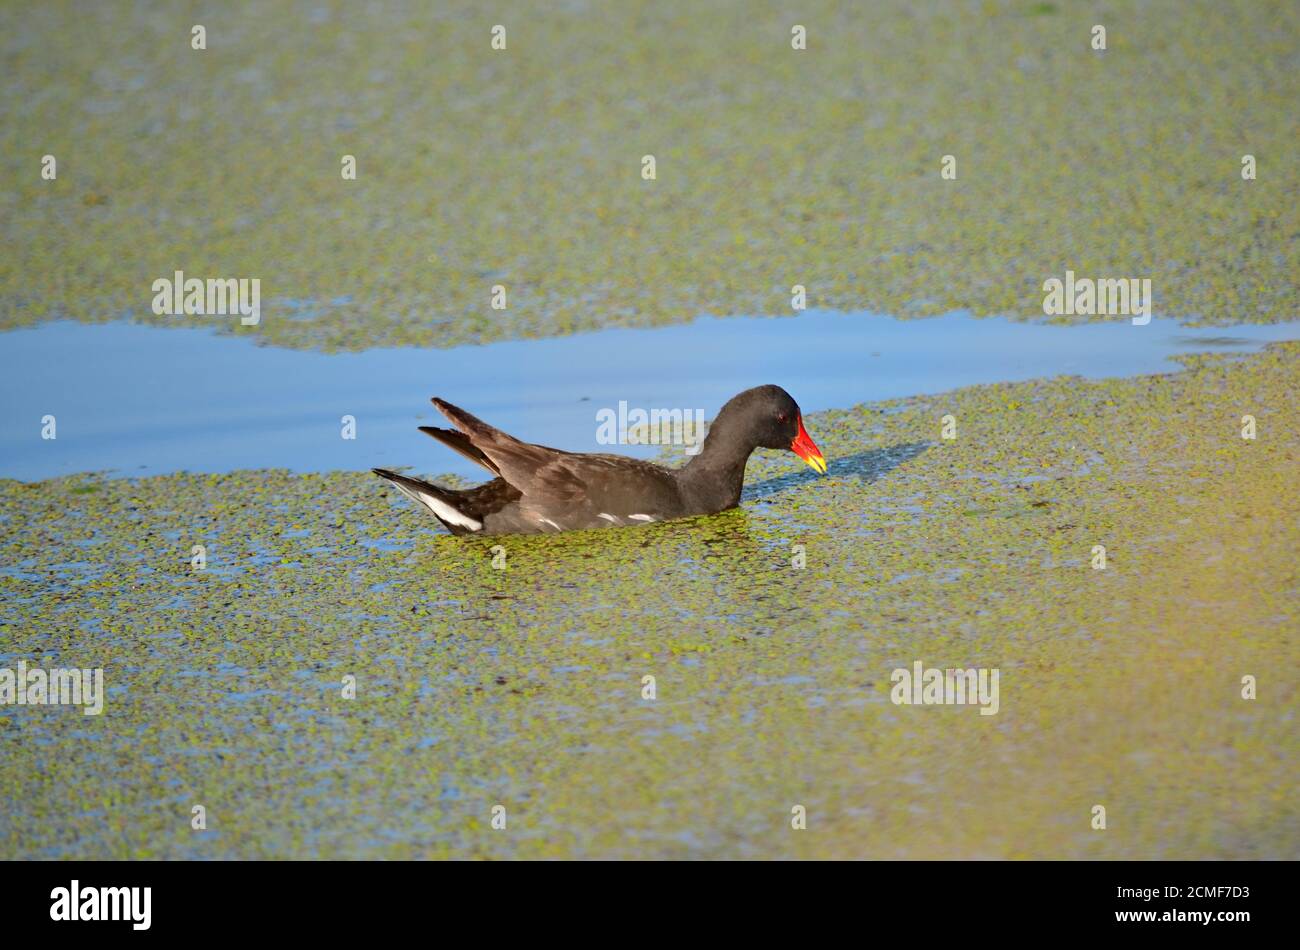 Common moorhen - Gallinula chloropus. Also known as the waterhen or the swamp chicken. Moorhen swims in the pond in its natural habitat. Stock Photo